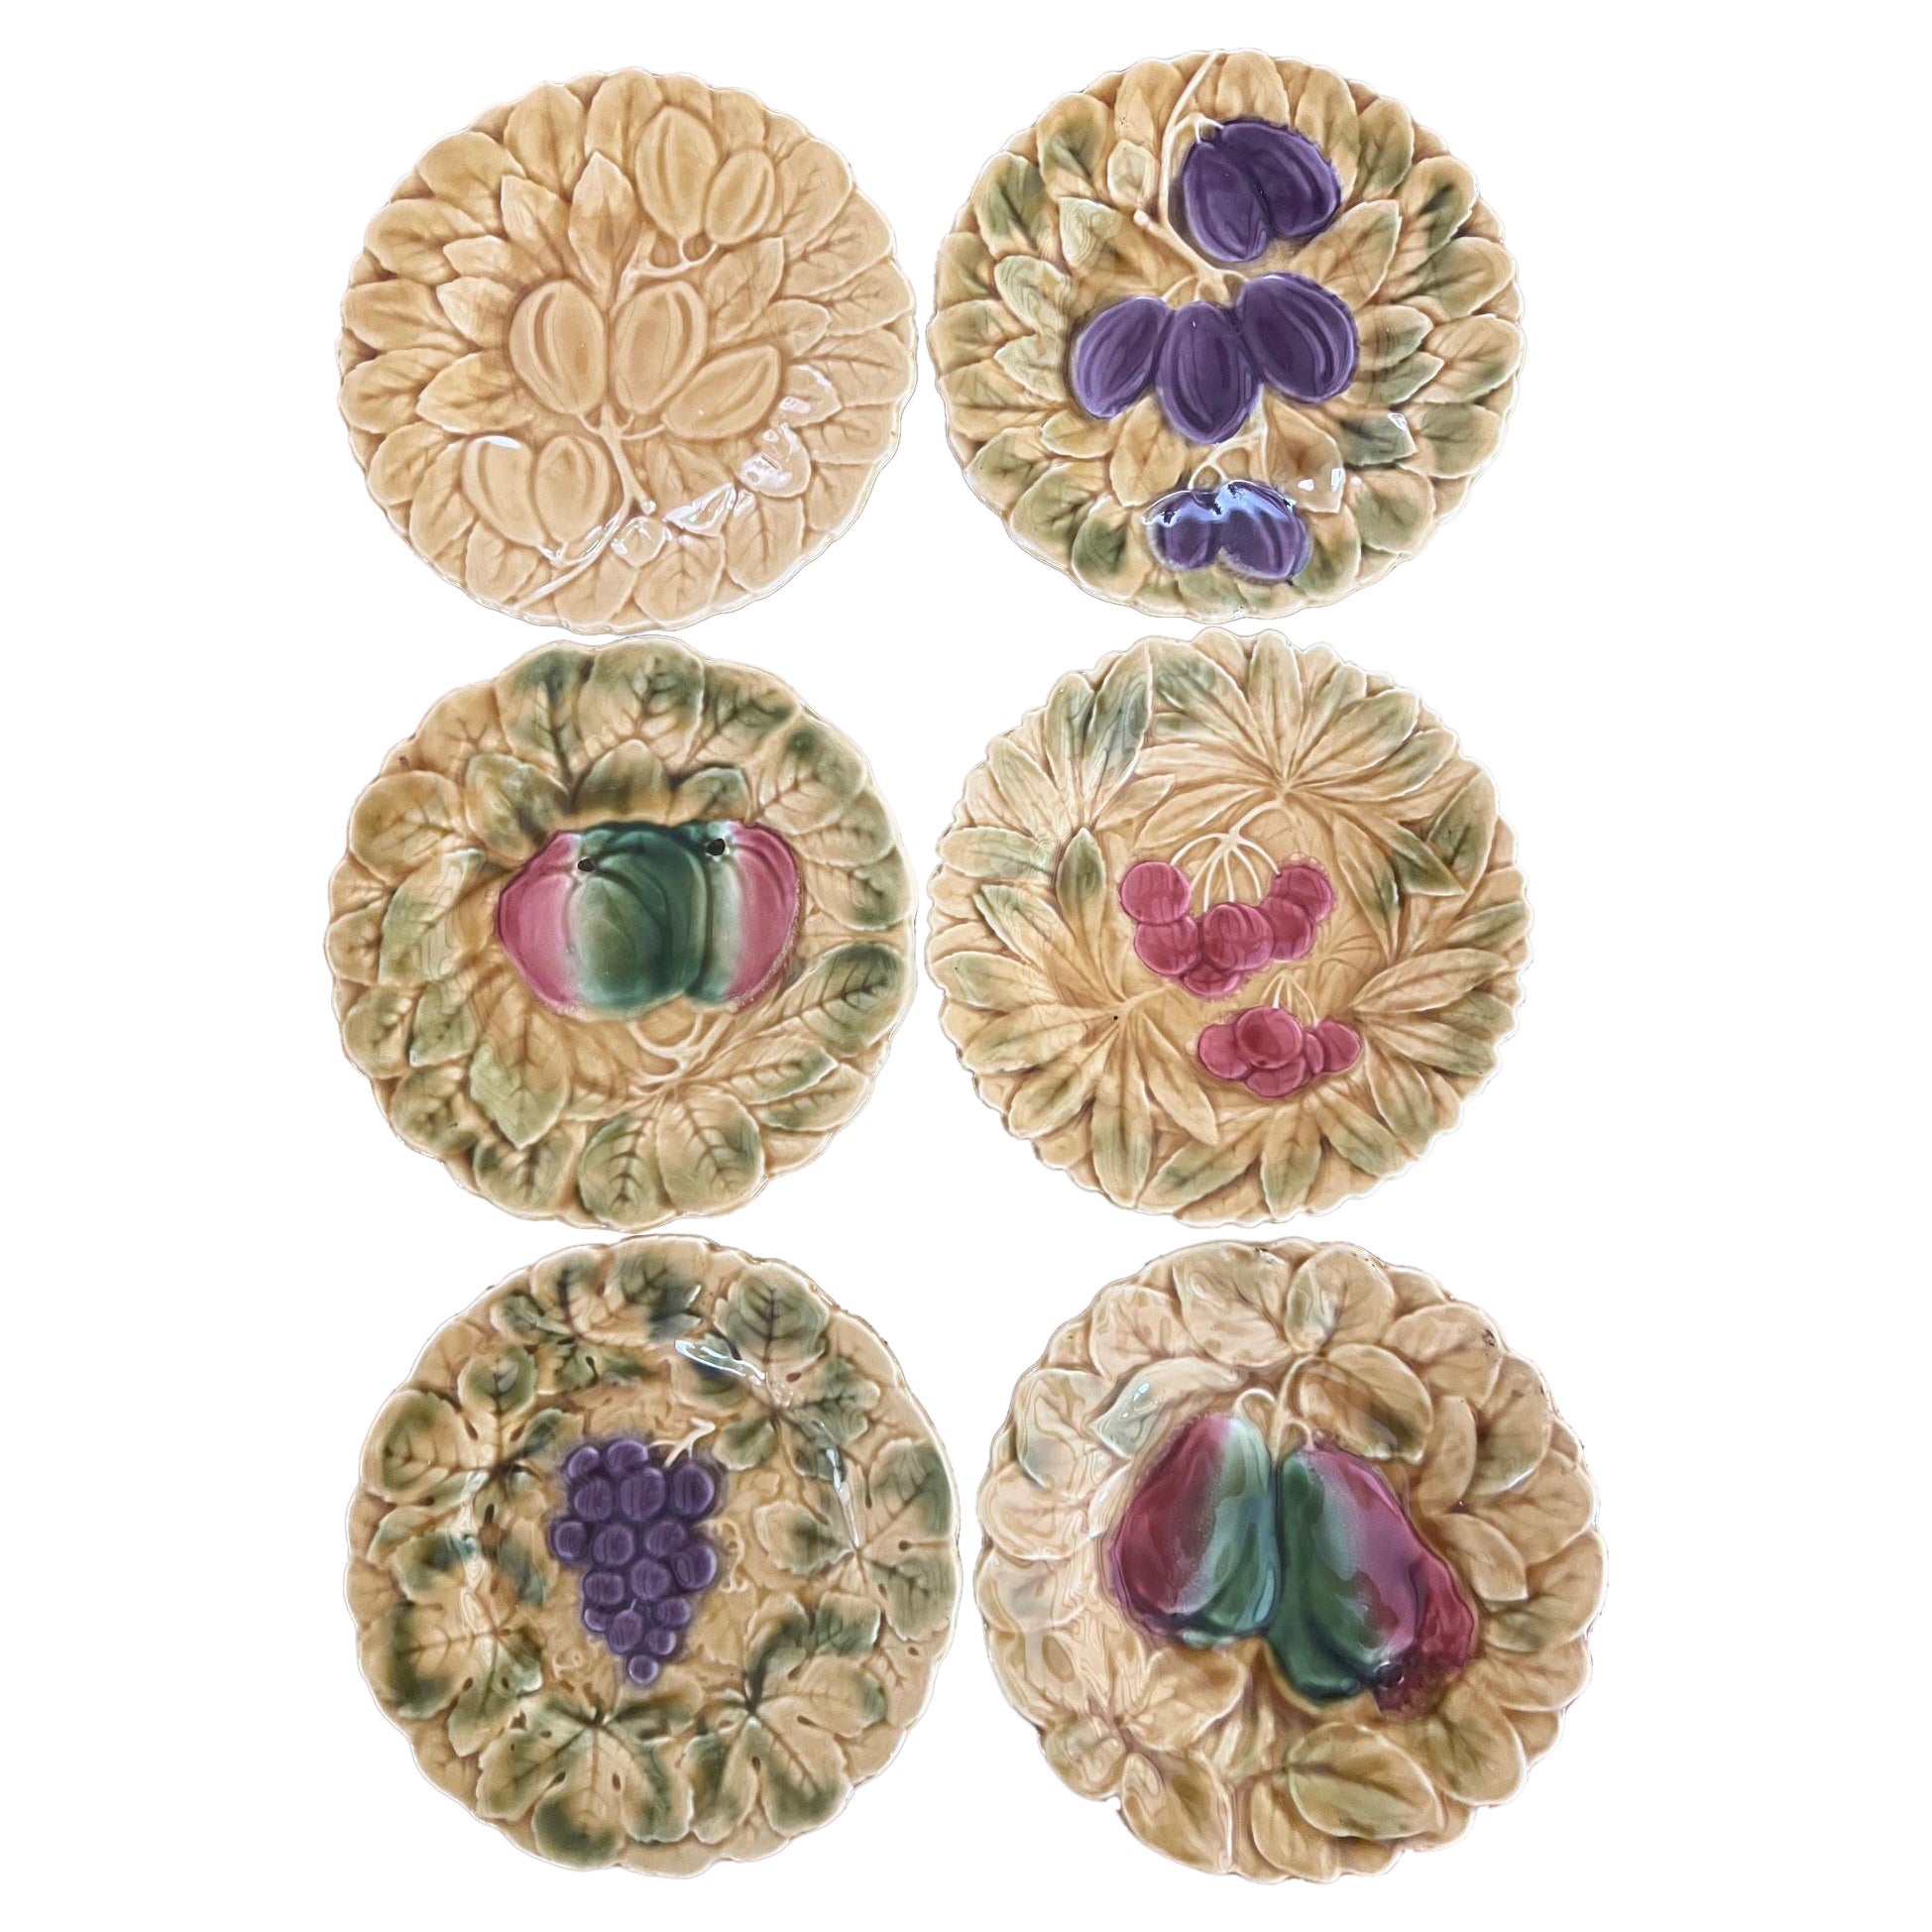 Vintage French Majolica Plate Set of 6 by Sarreguemines, C. 1940's